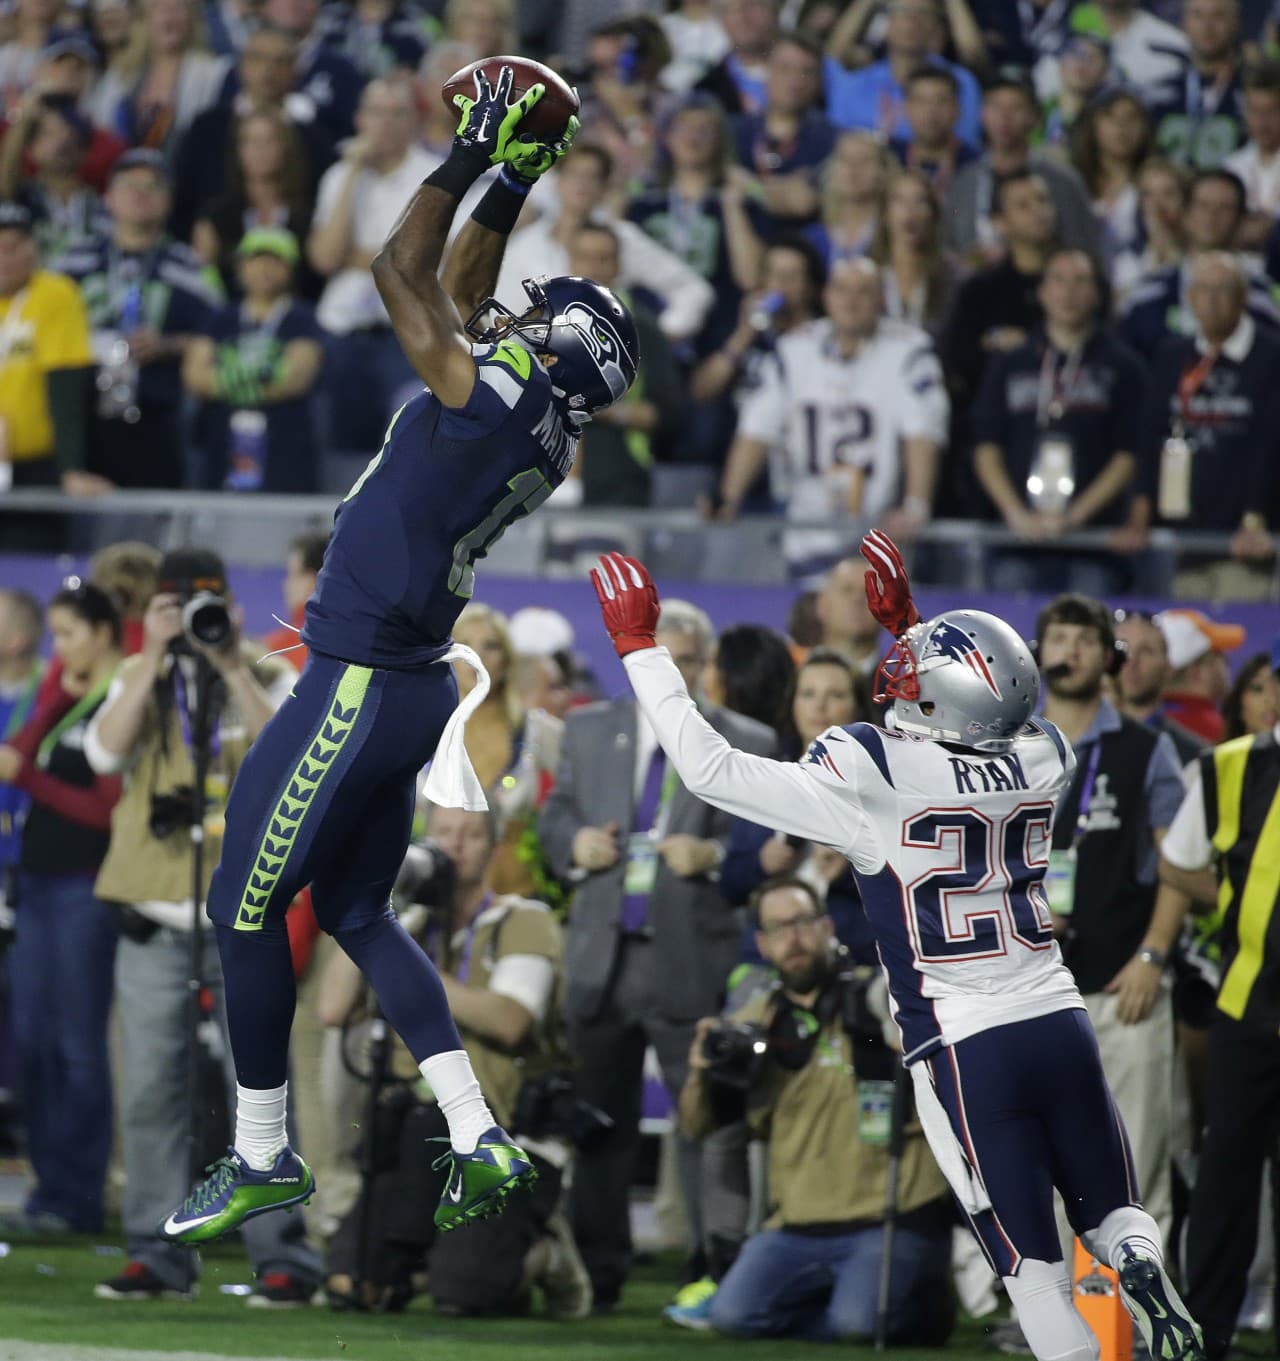 Seattle Seahawks wide receiver Chris Matthews, left, catches an 11-yard touchdown pass in front of New England Patriots cornerback Logan Ryan (26) during the first half of Super Bowl XLIX. (Elise Amendola/AP)